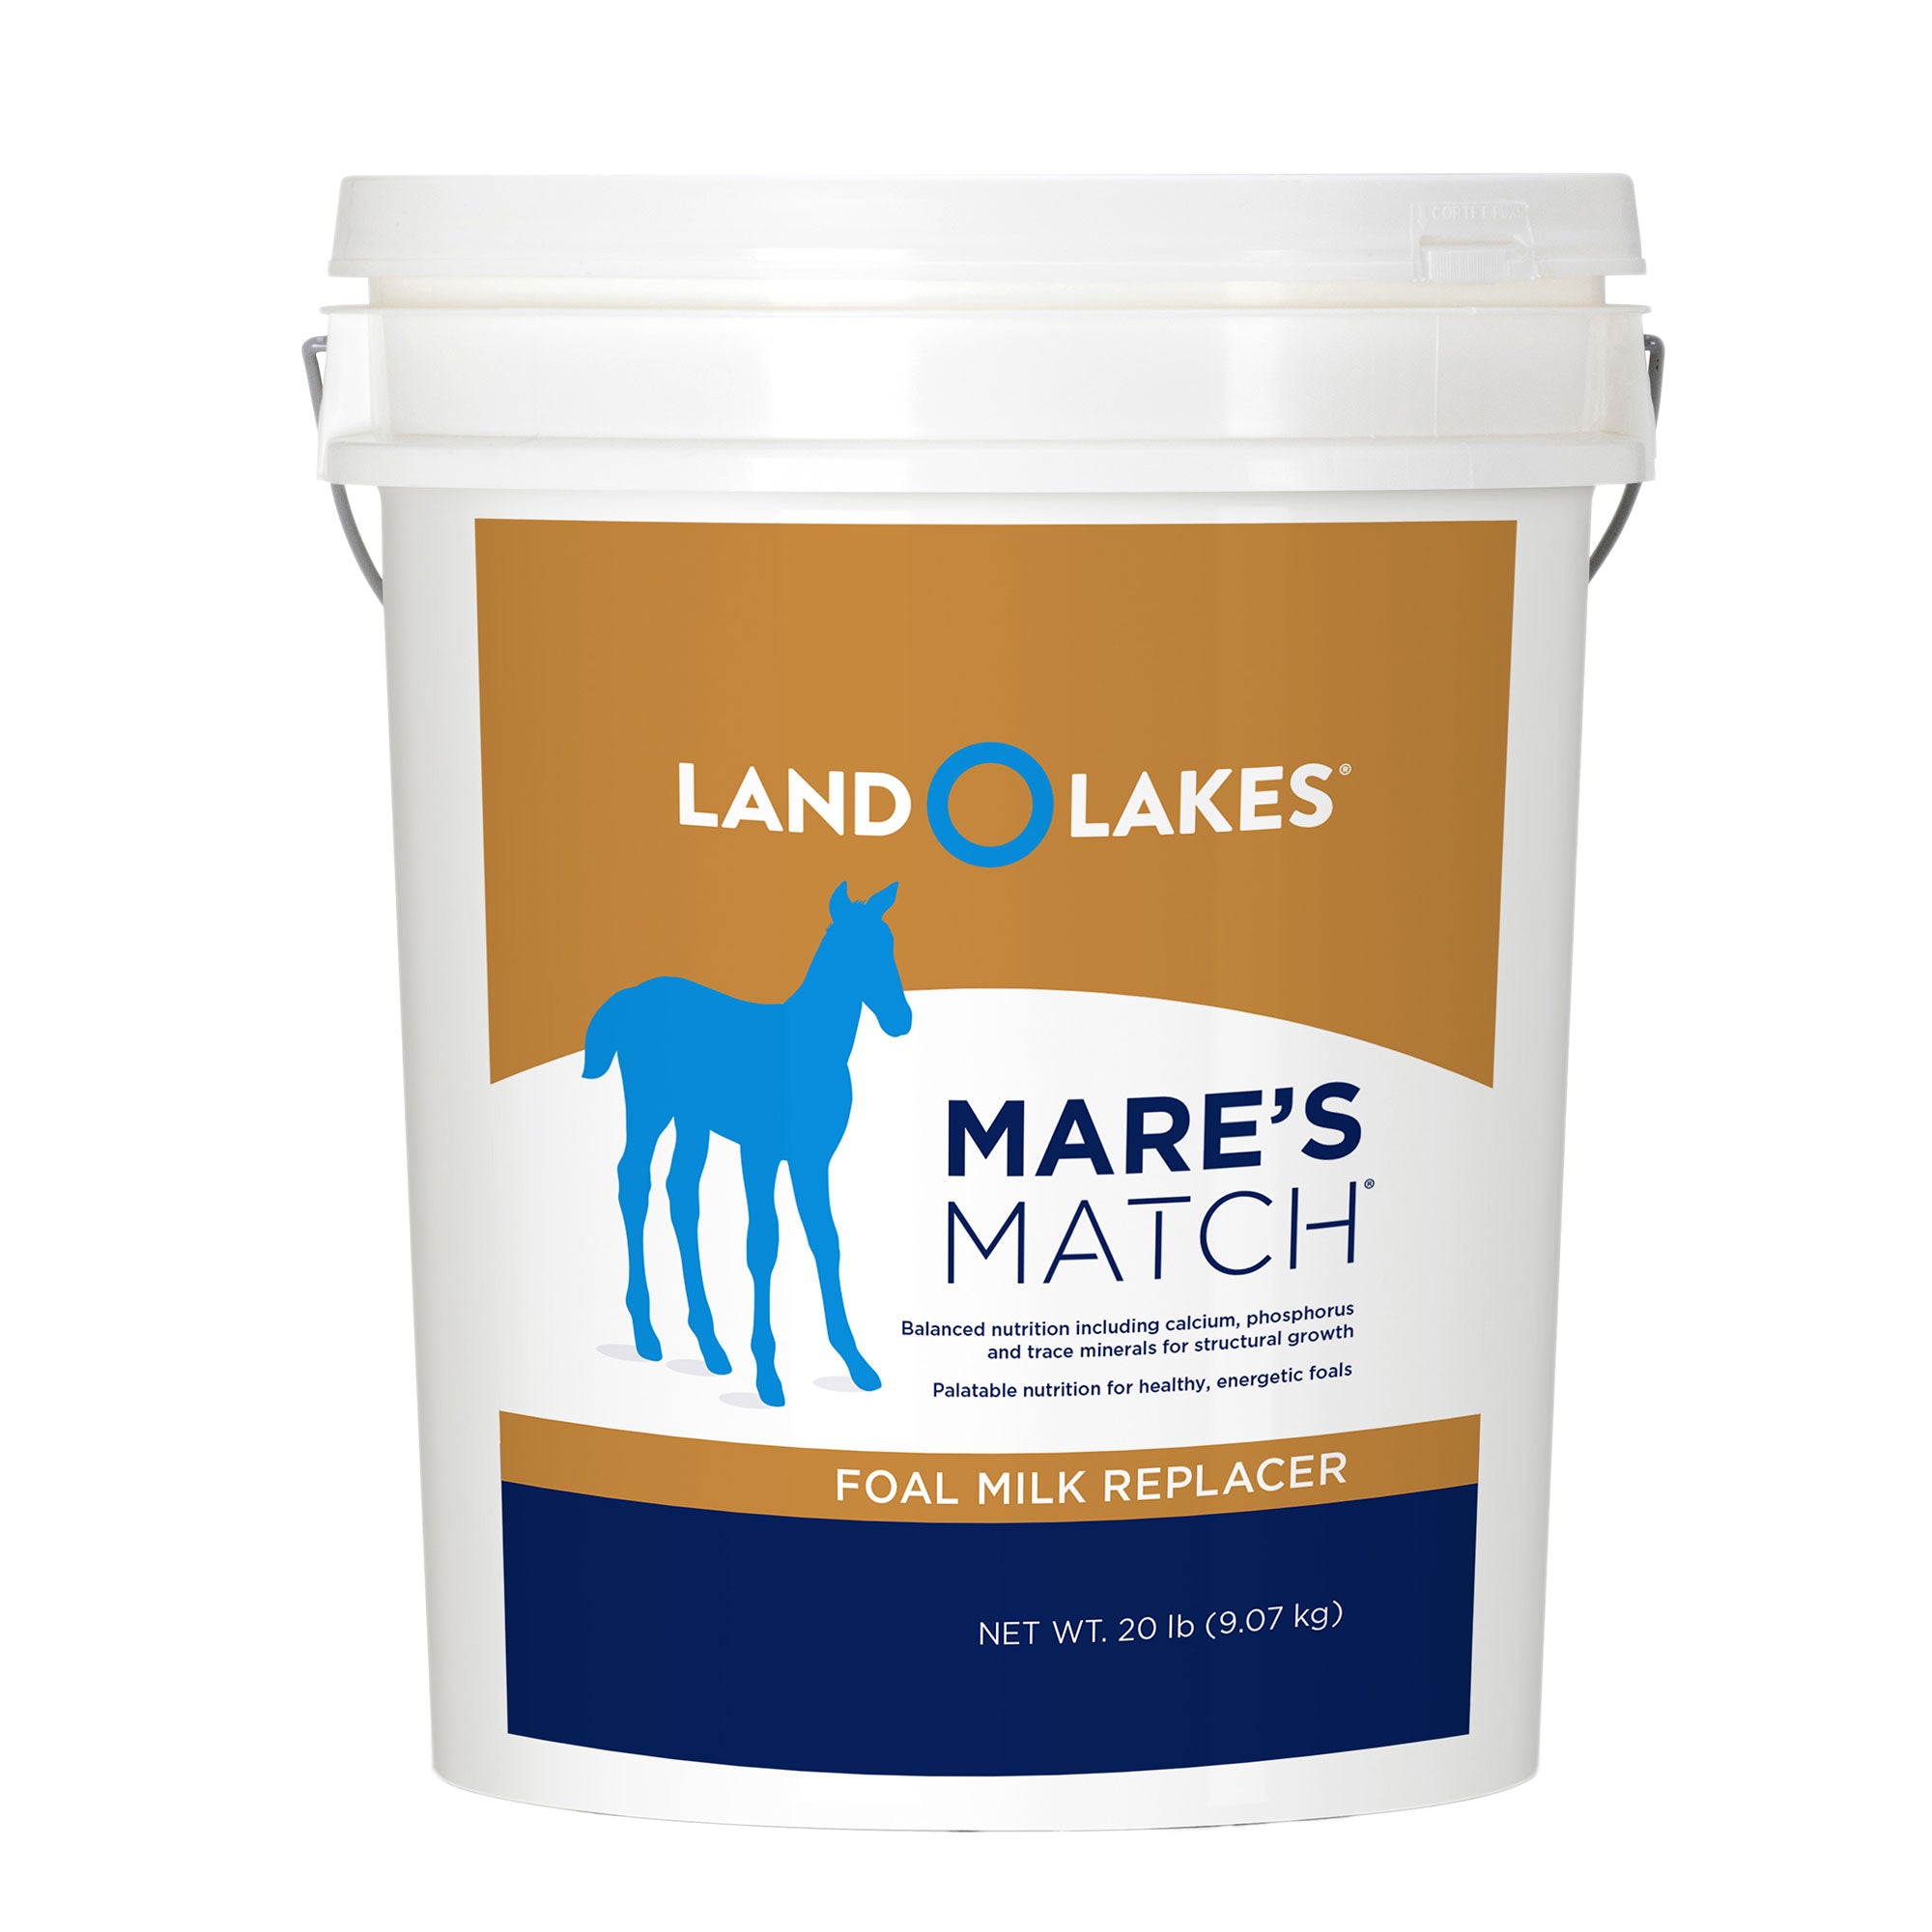 LAND O LAKES® Mare’s Match® Foal Milk Replacer